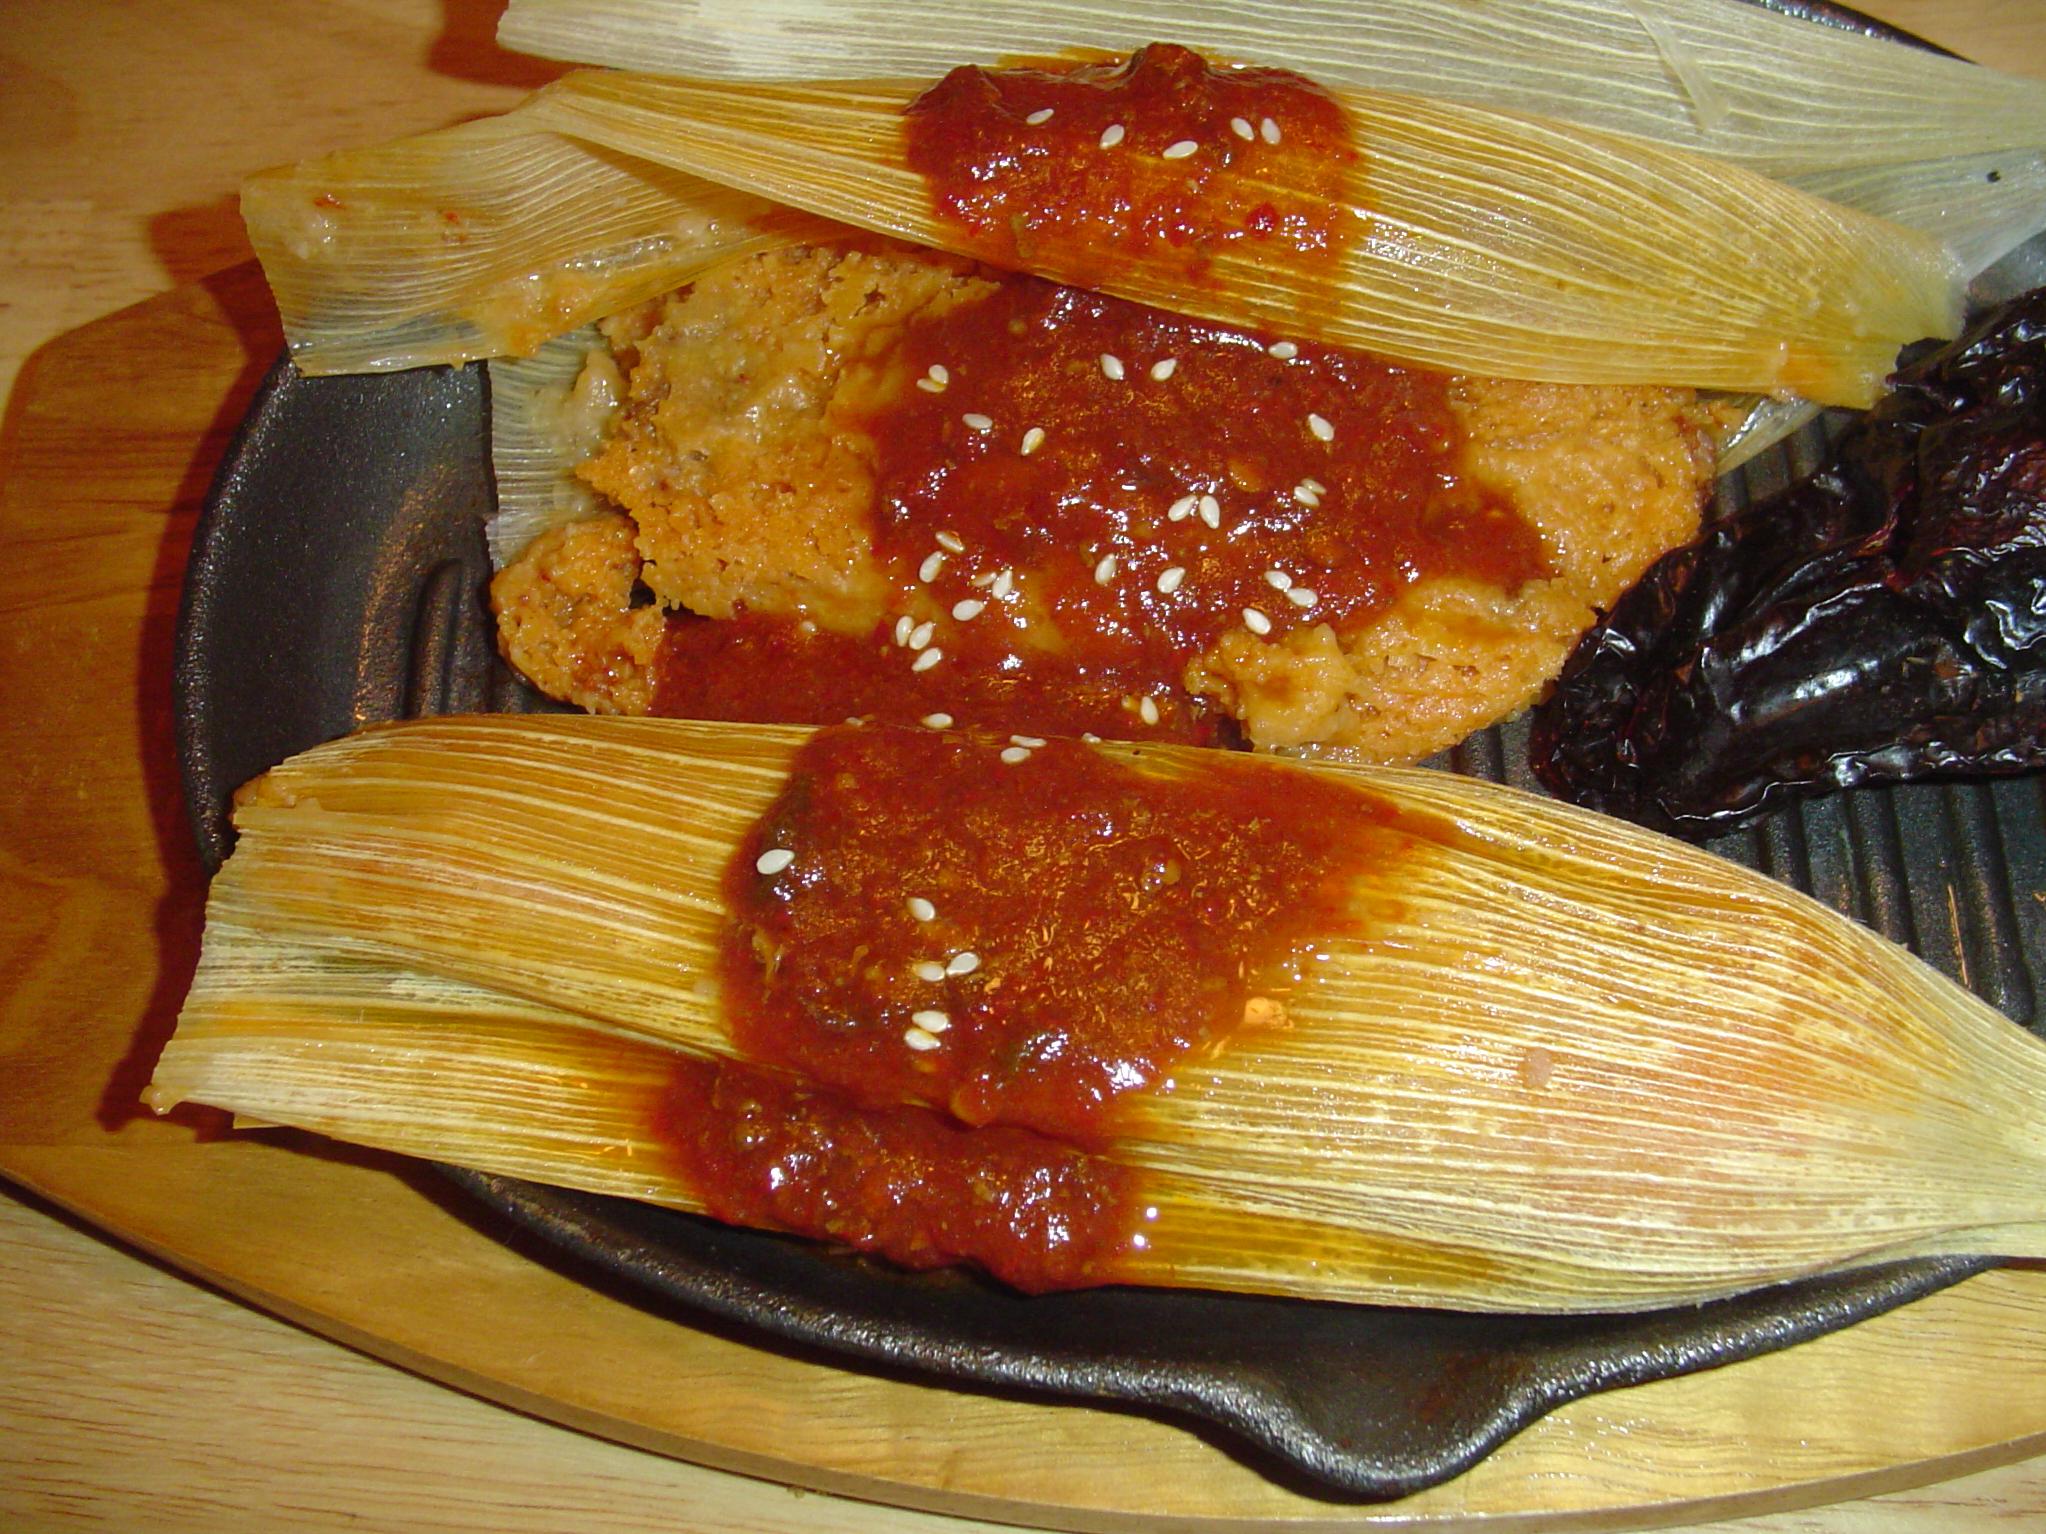  A tantalizing aroma wafts through the kitchen as tamales cook